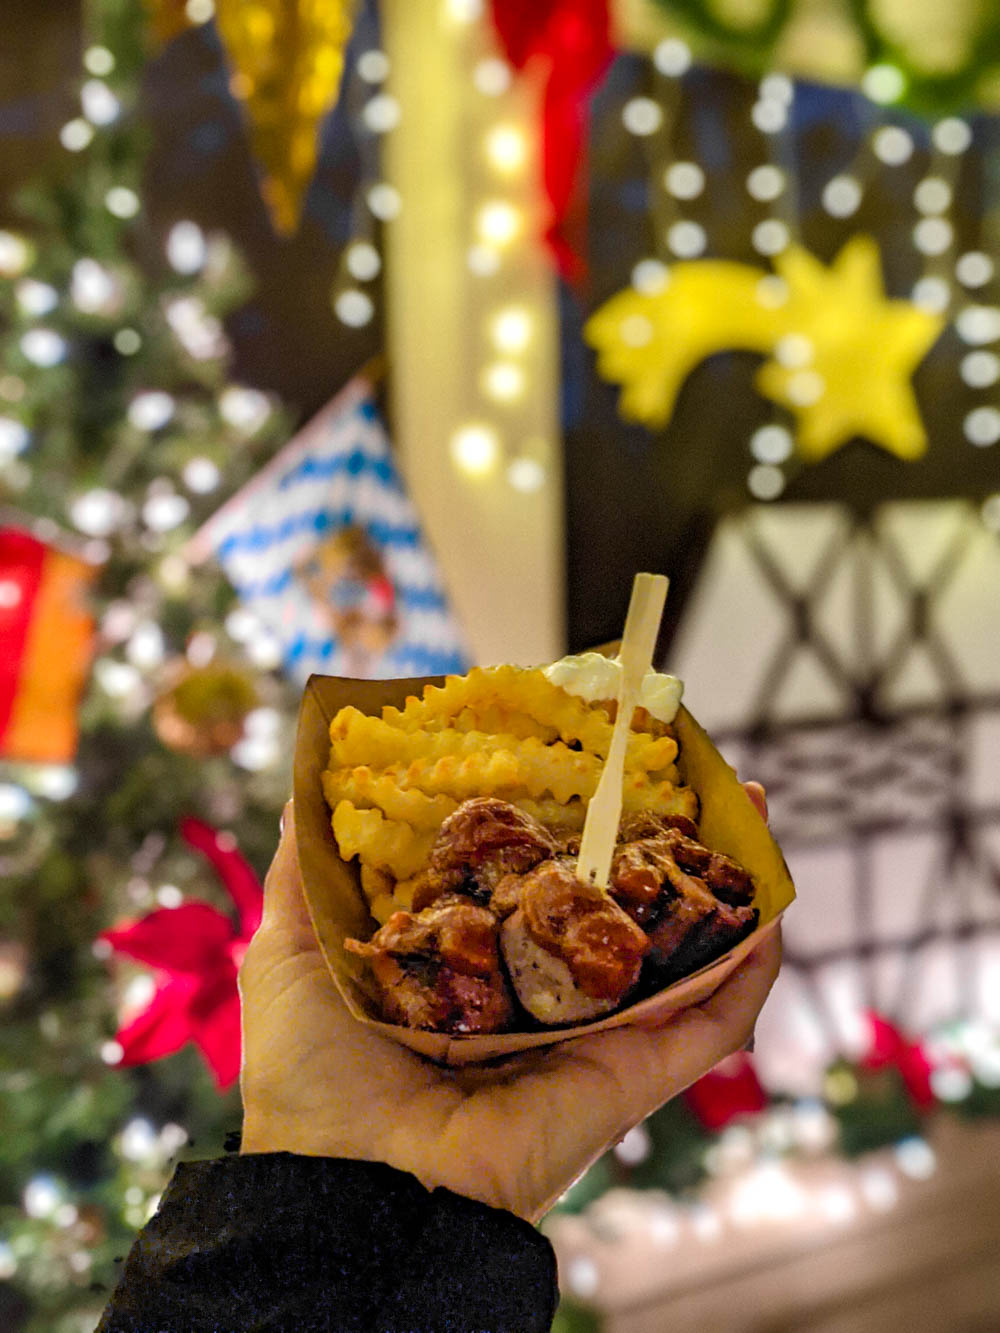 german currywurst and fries in front of bright christmas decorations